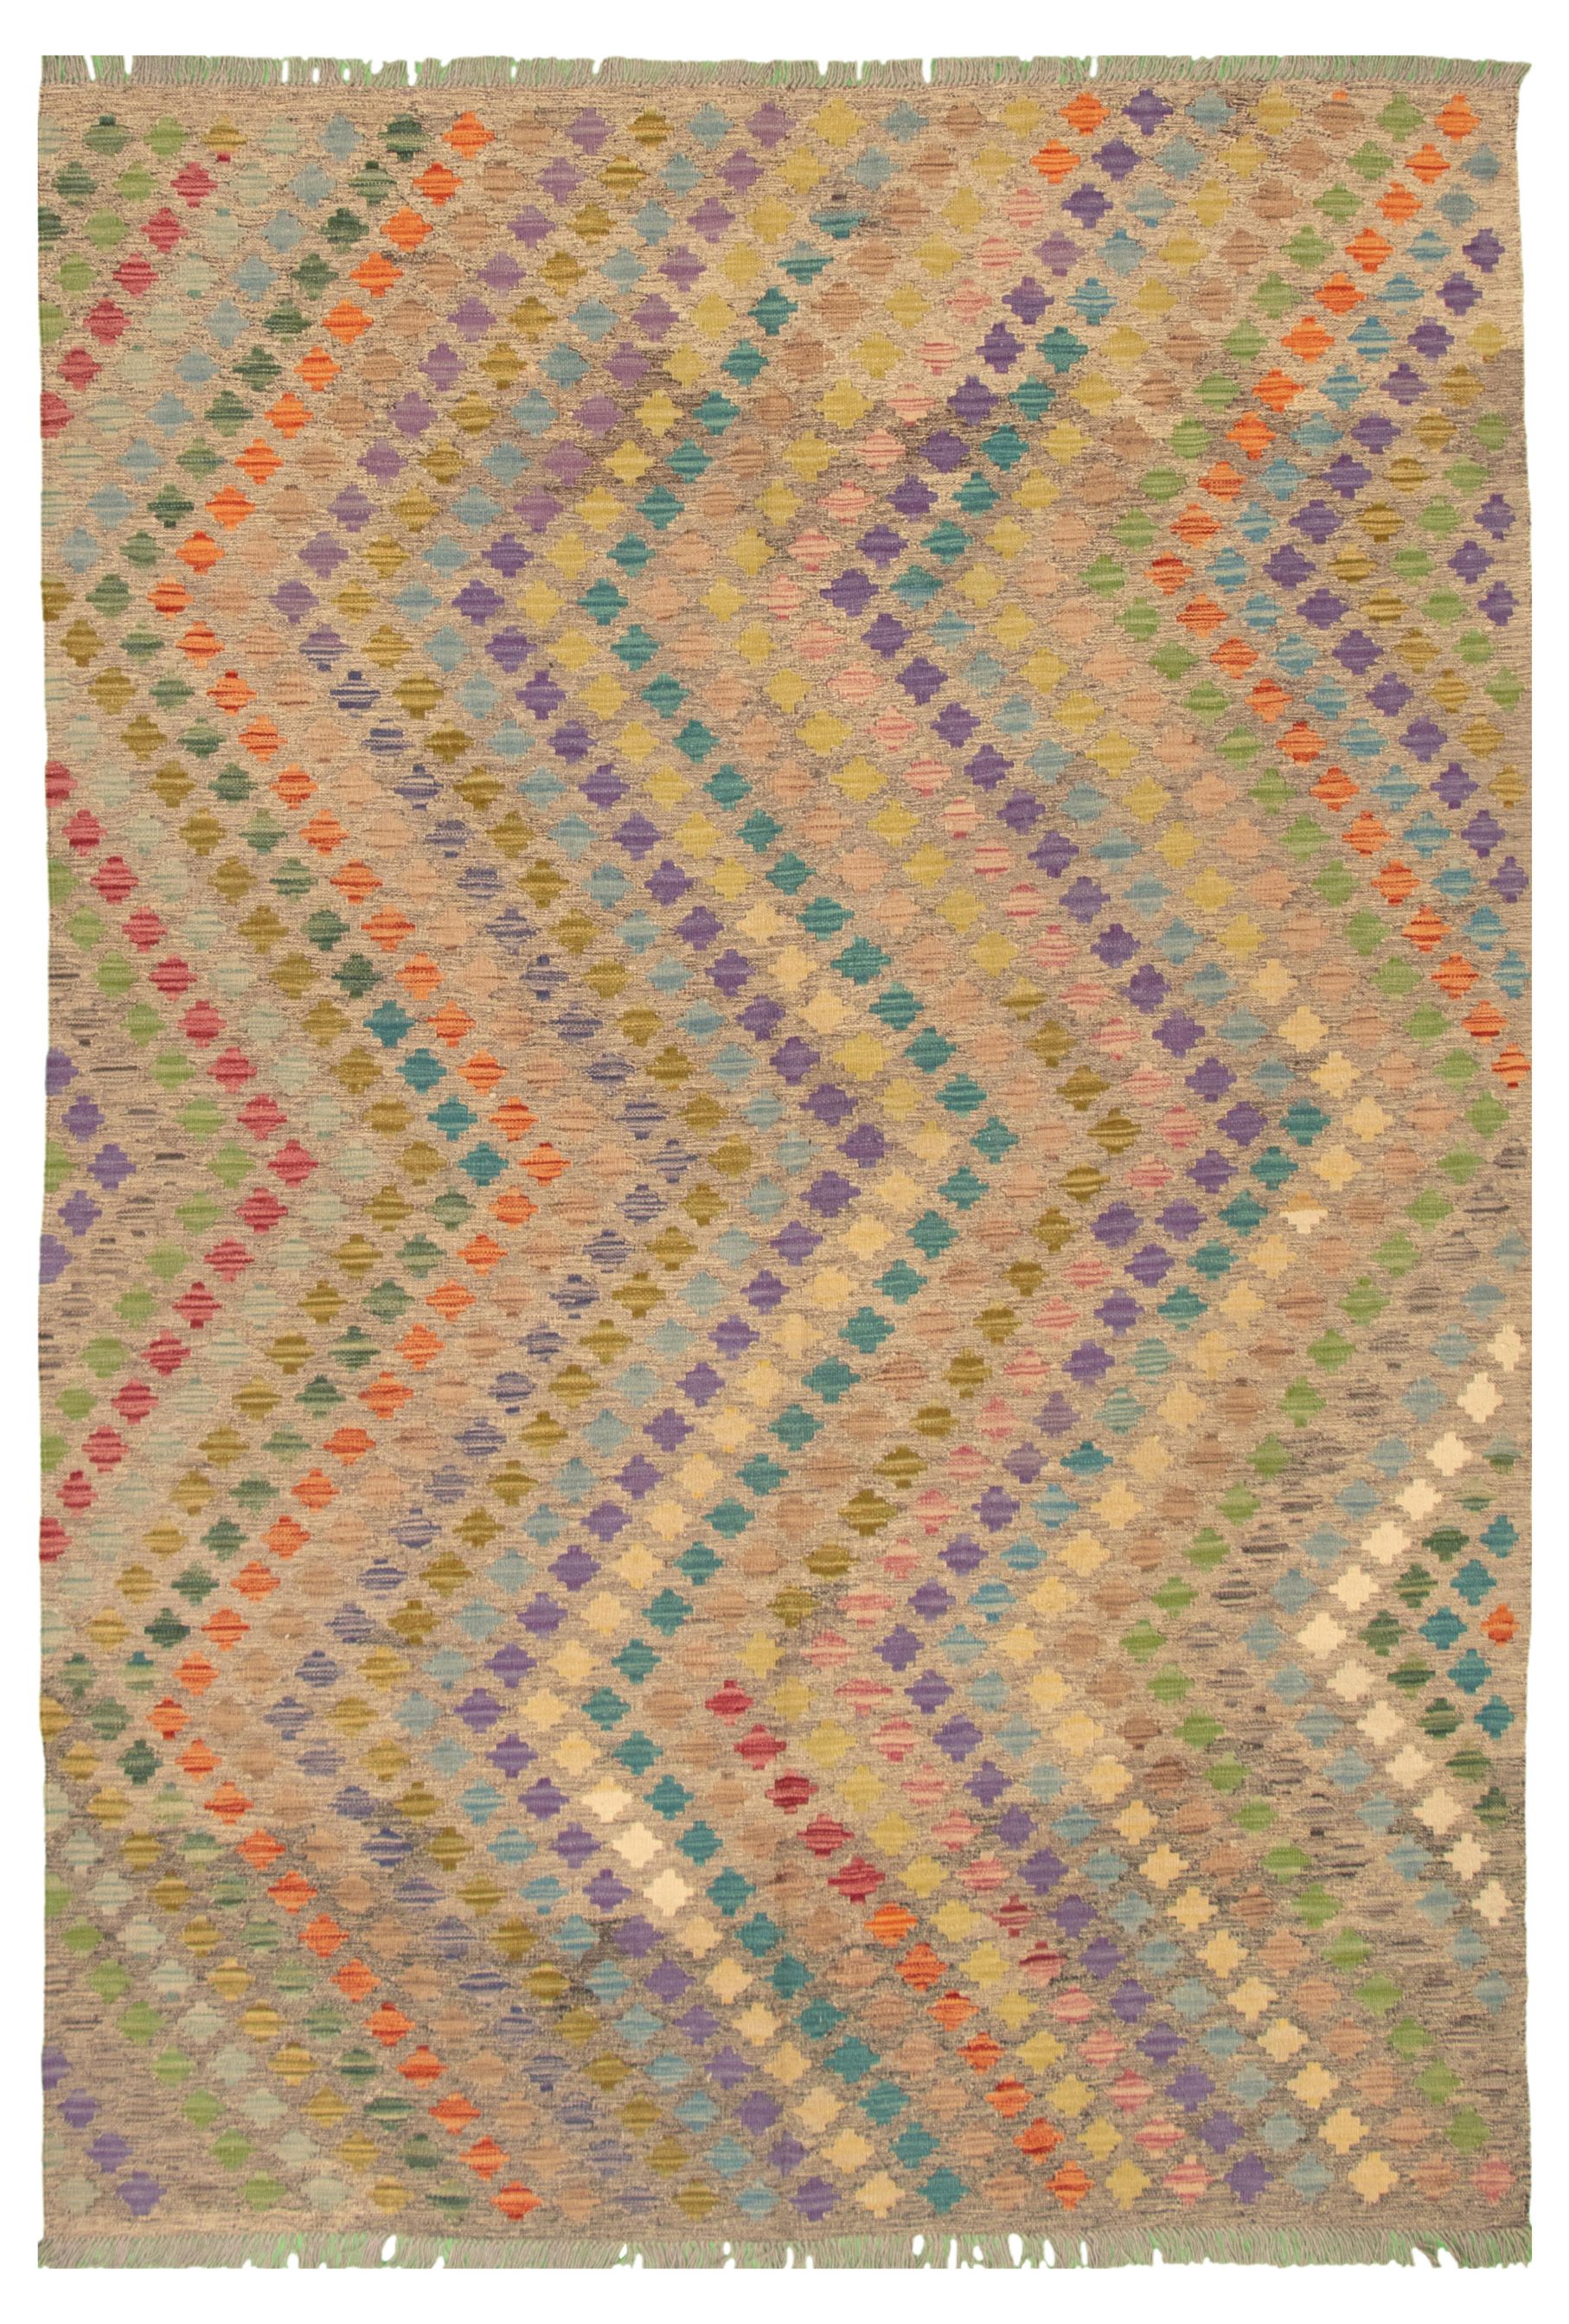 Hand woven Bold and Colorful  Grey Wool Kilim 6'7" x 9'7"  Size: 6'7" x 9'7"  